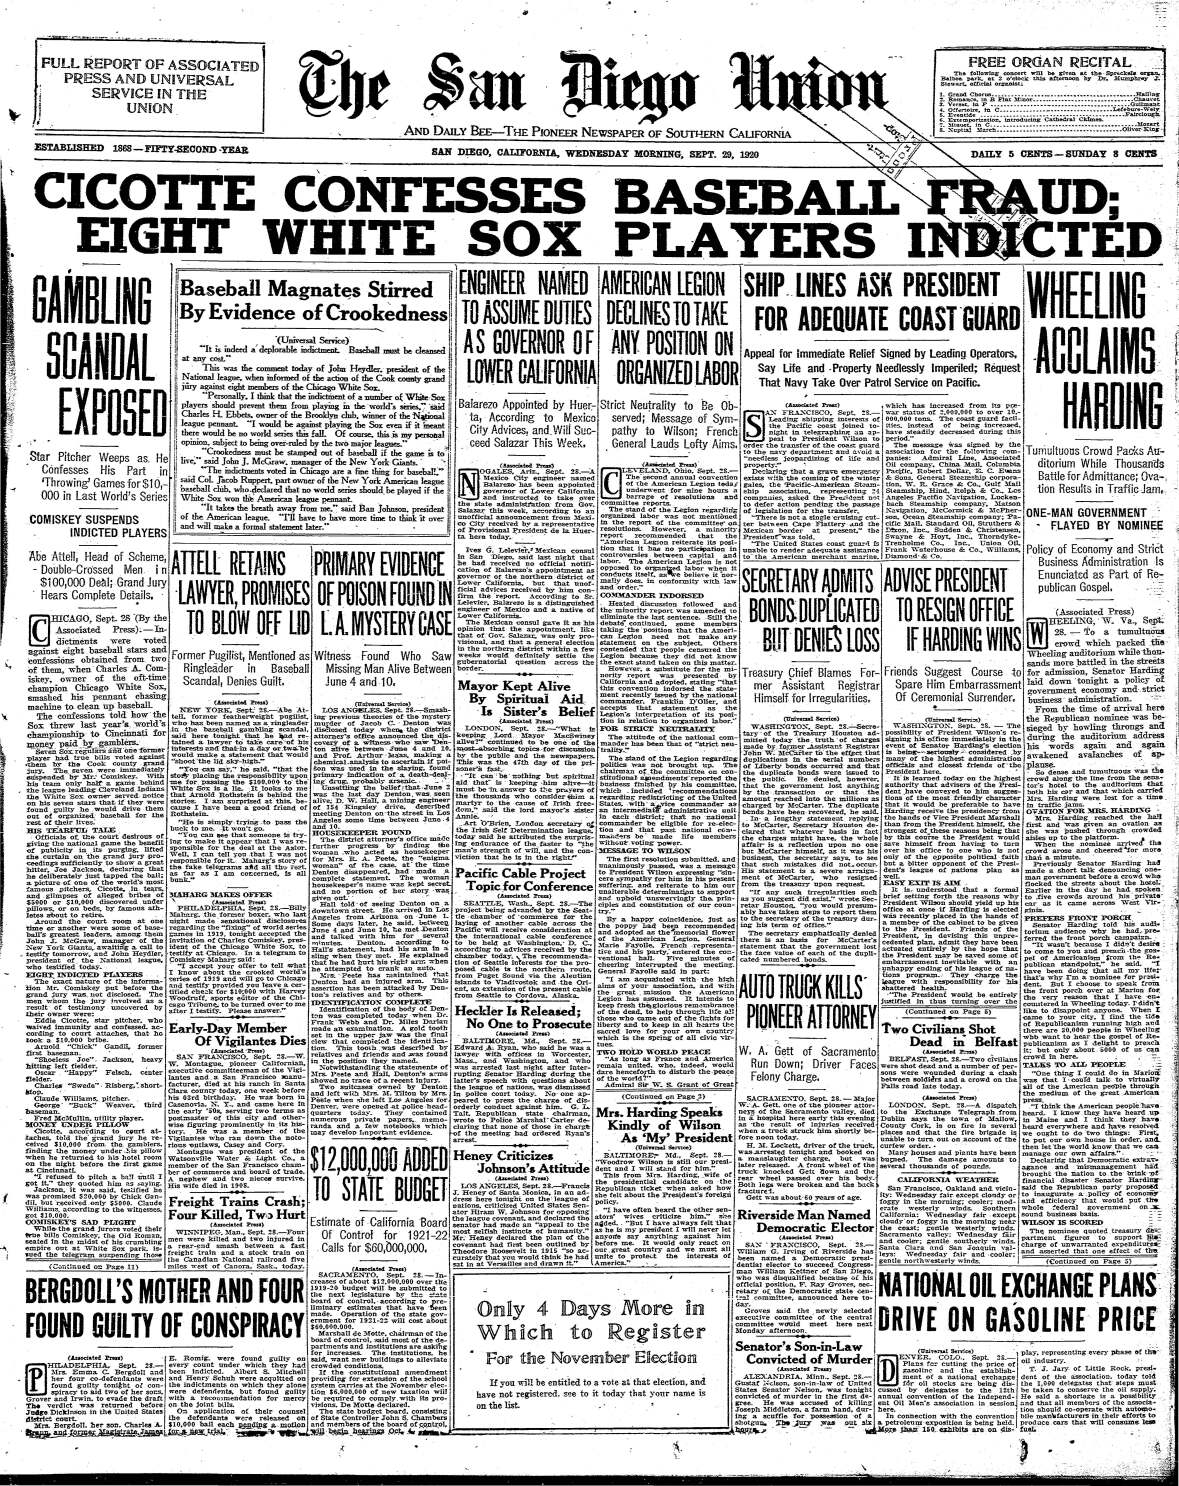 World Series disgrace 100 years ago: 2 Minnesotans among 'Black Sox' banned  for life